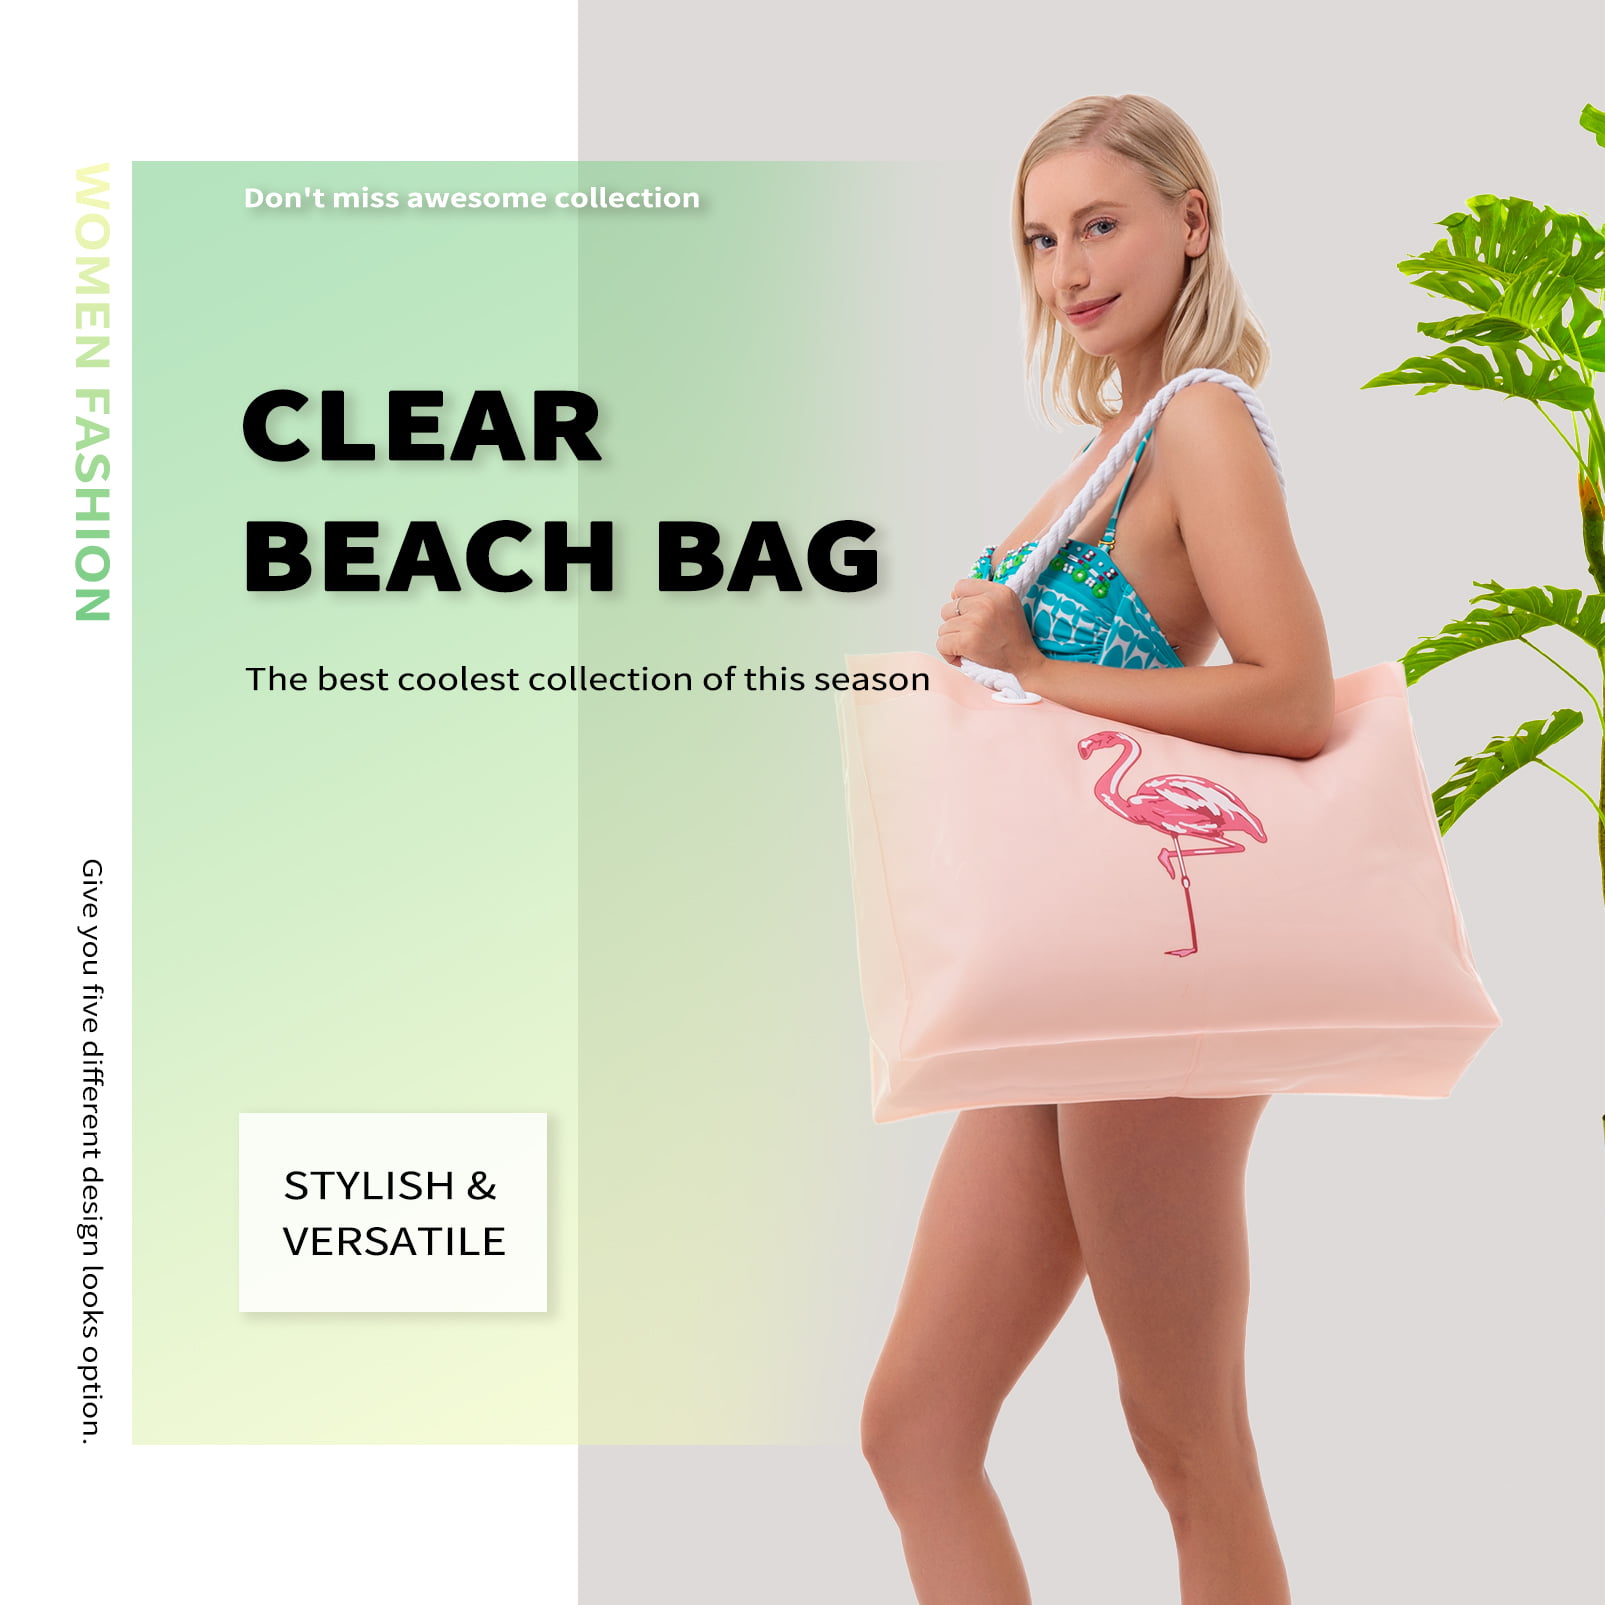 Sweetude Clear Beach Tote Bag Transparent PVC Beach Bag Women's Large Tote Bag Waterproof Stadium Bags for Summer Pool Party